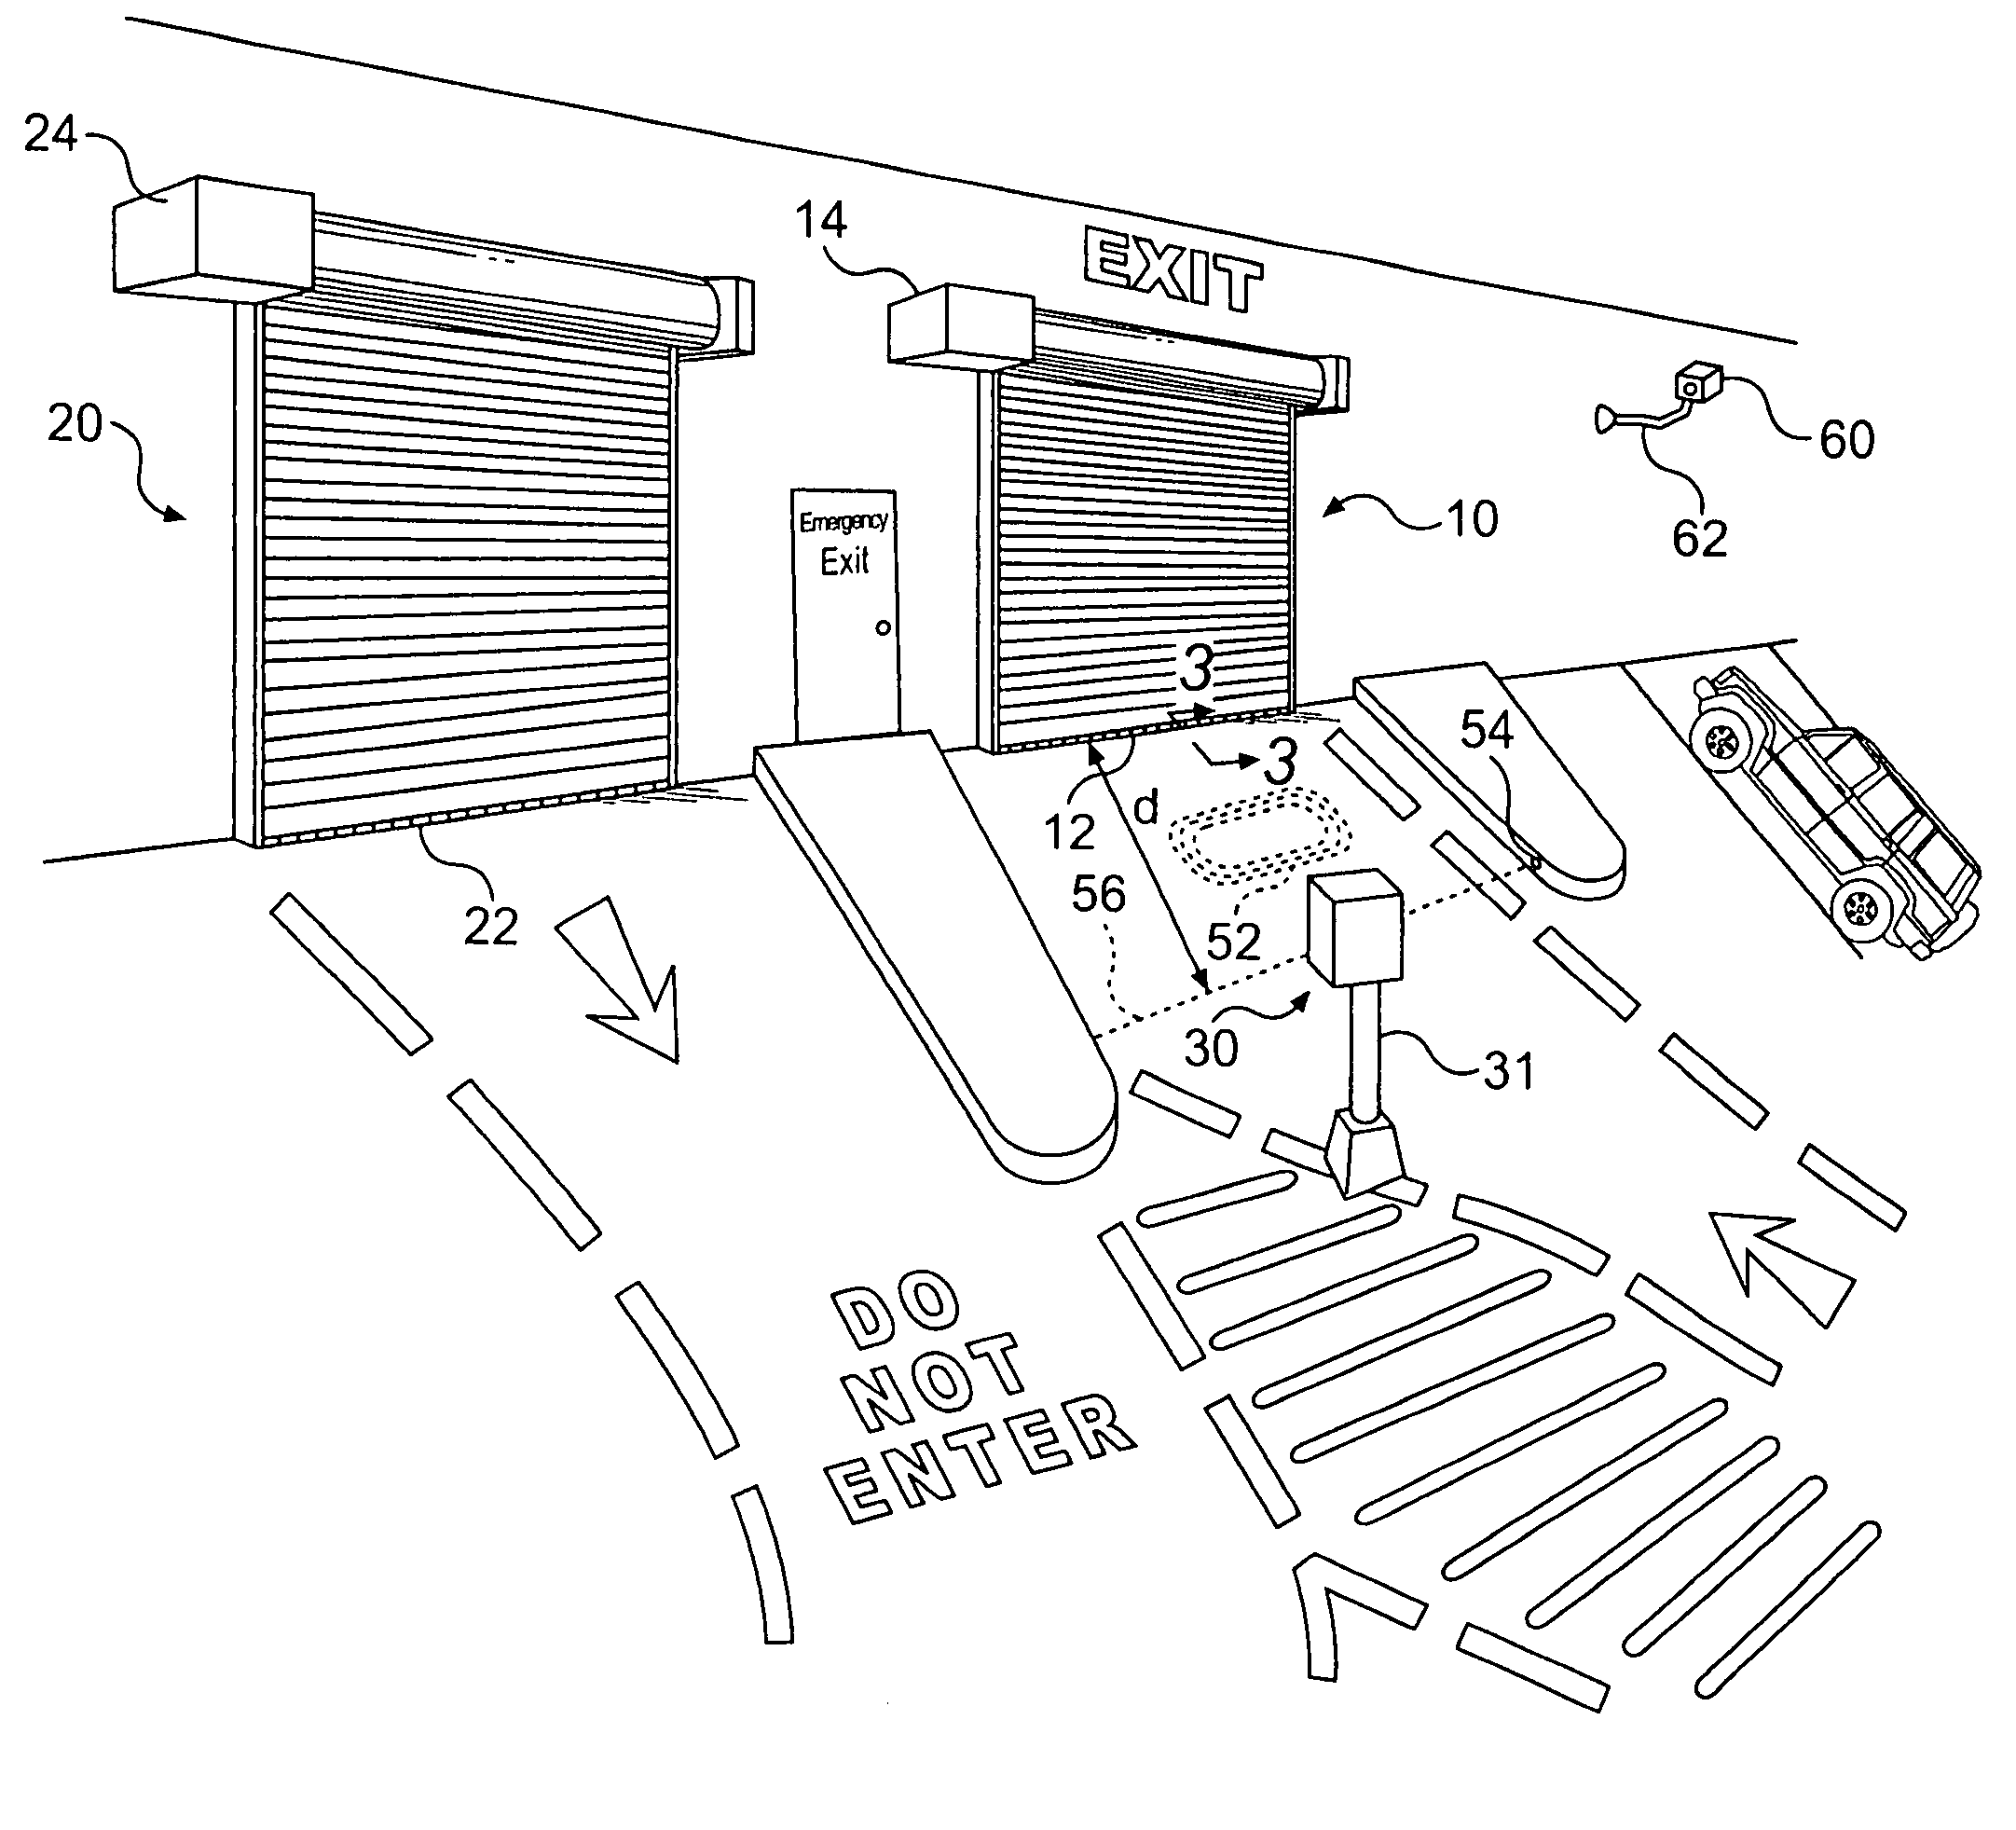 Parking barrier with accident event logging and self-diagnostic control system